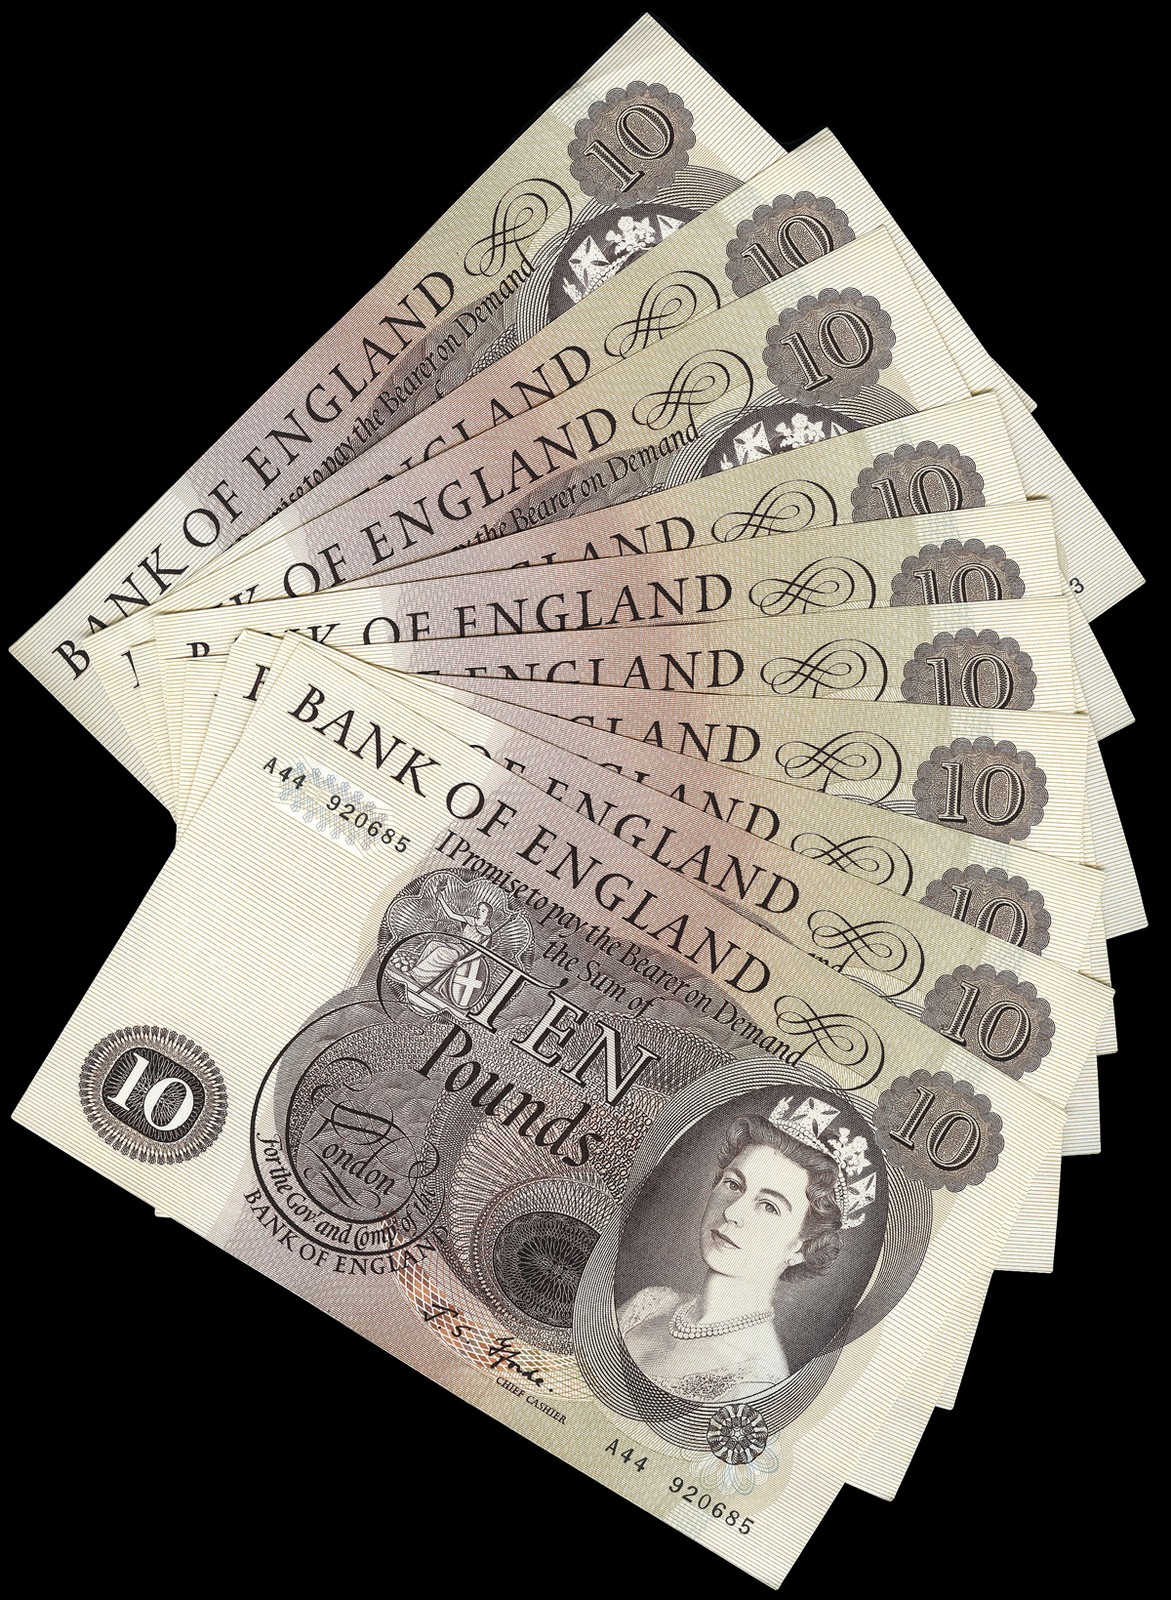 BRITISH BANKNOTES, Bank of England, J.S. Fforde, Ten Pounds (10), all 1967-70, A44 920685-94